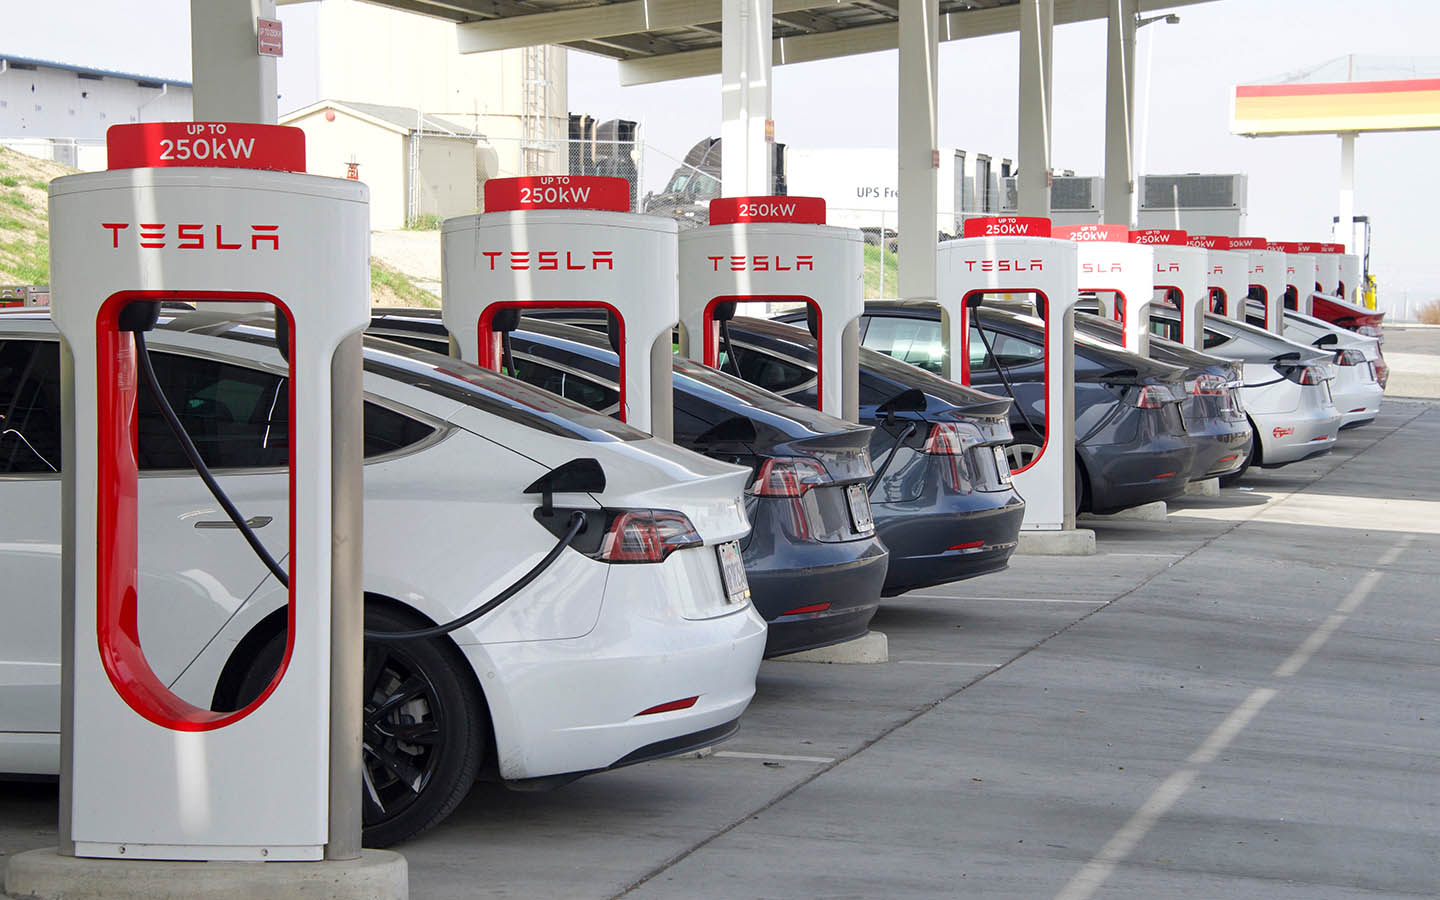 introduction of charging stations was a major landmark in Tesla Car History